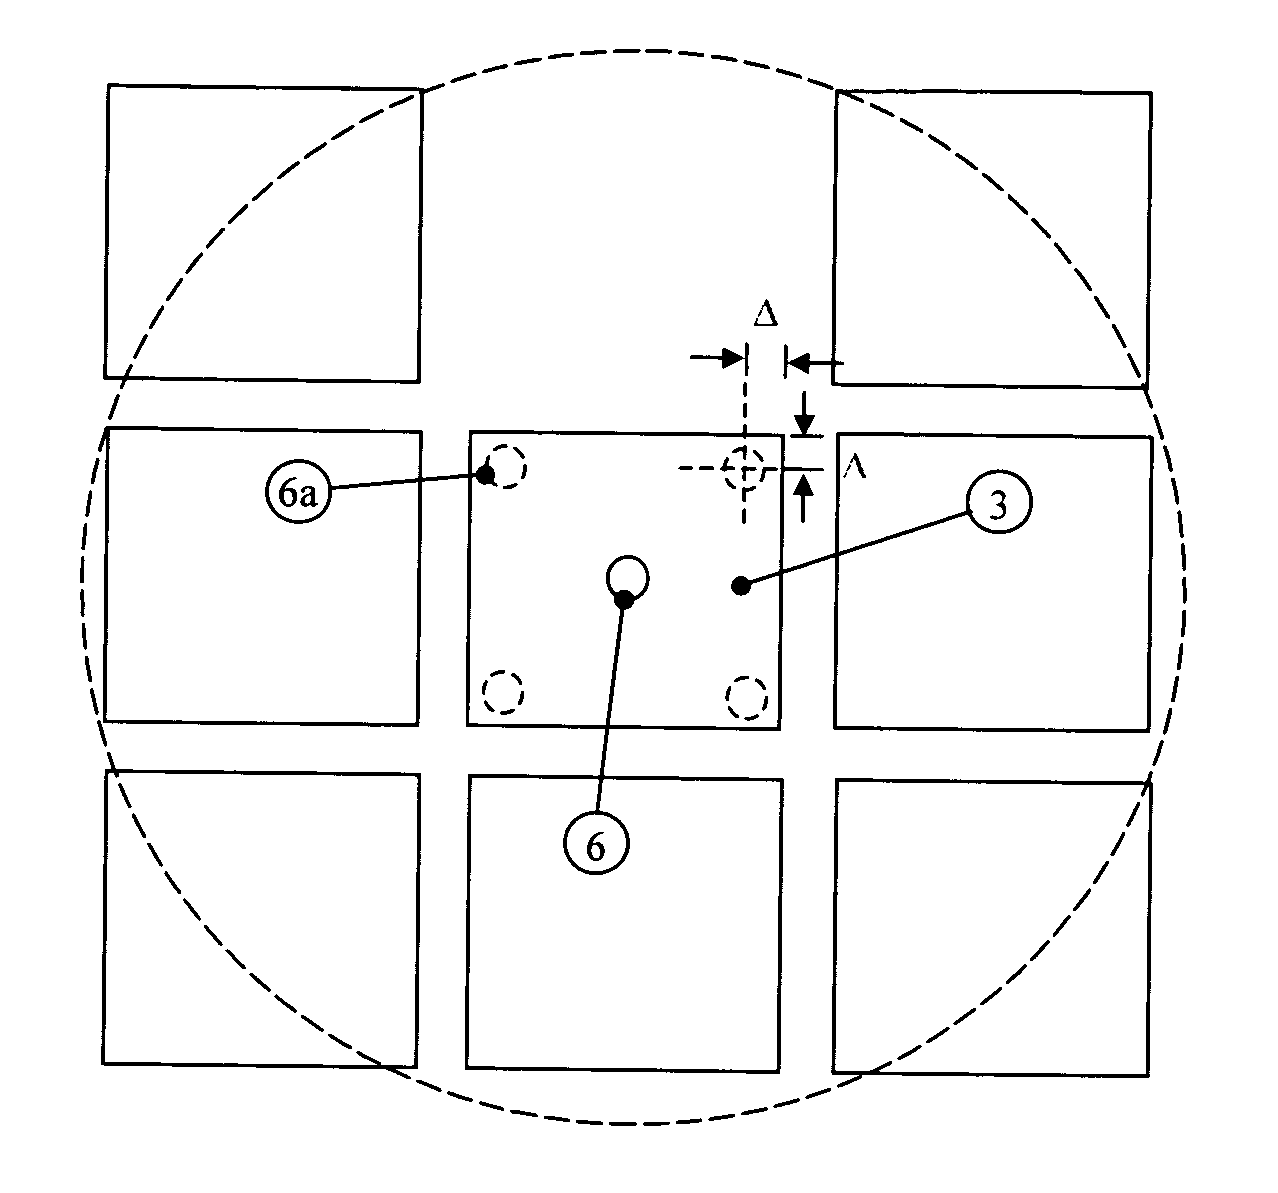 Apparatus and method for thin die detachment